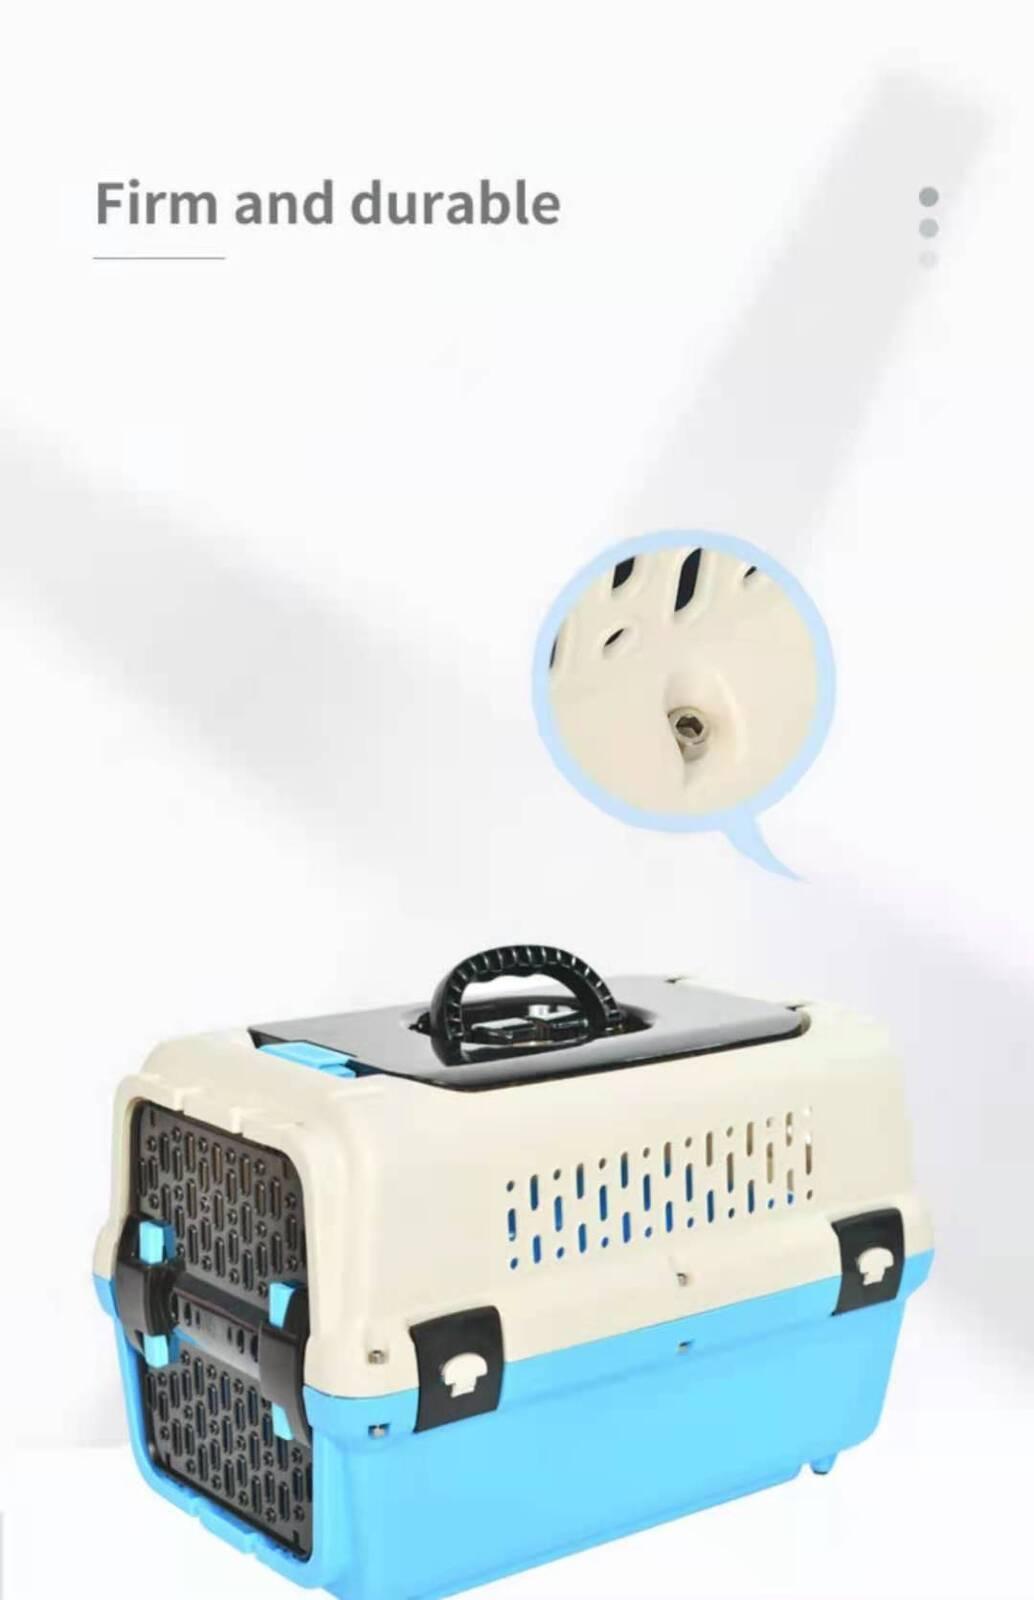 Large Dog Cat Crate Pet Rabbit Carrier Travel Cage With Tray & Window Blue